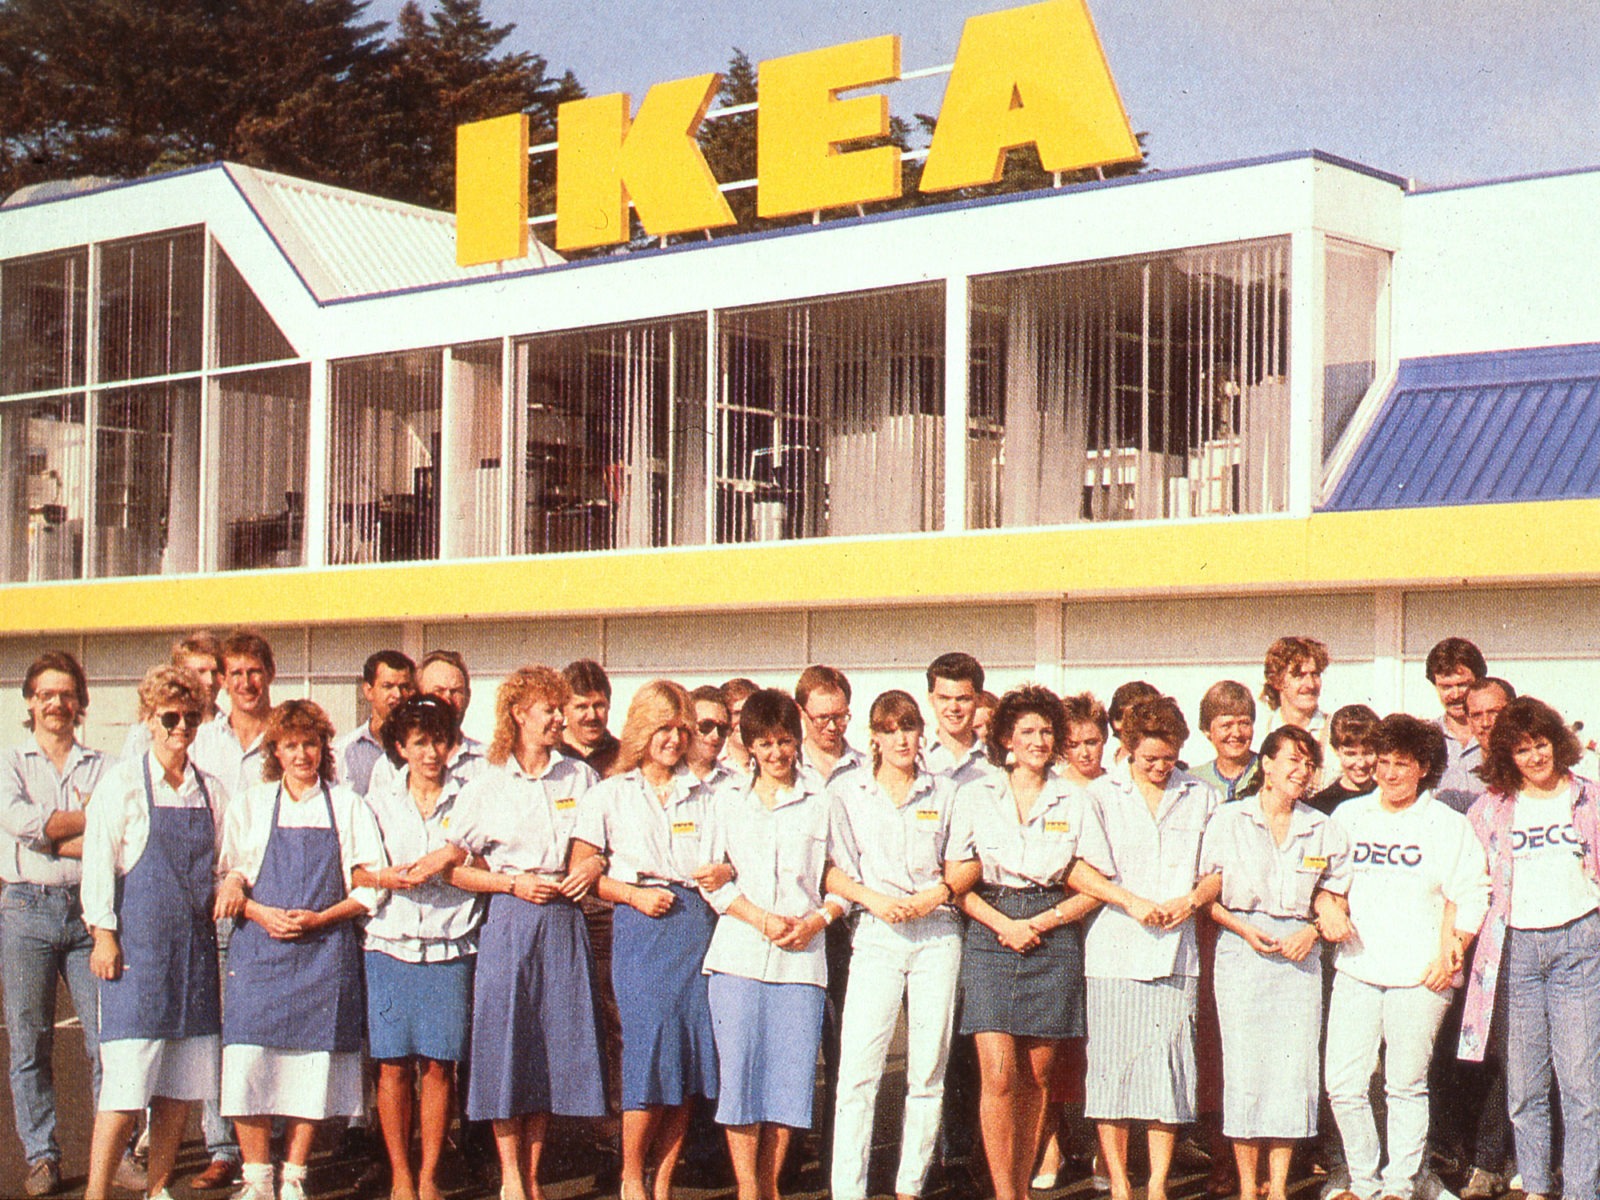 Group photo of IKEA staff in Germany wearing blue and white clothes in front of white building with yellow IKEA sign.